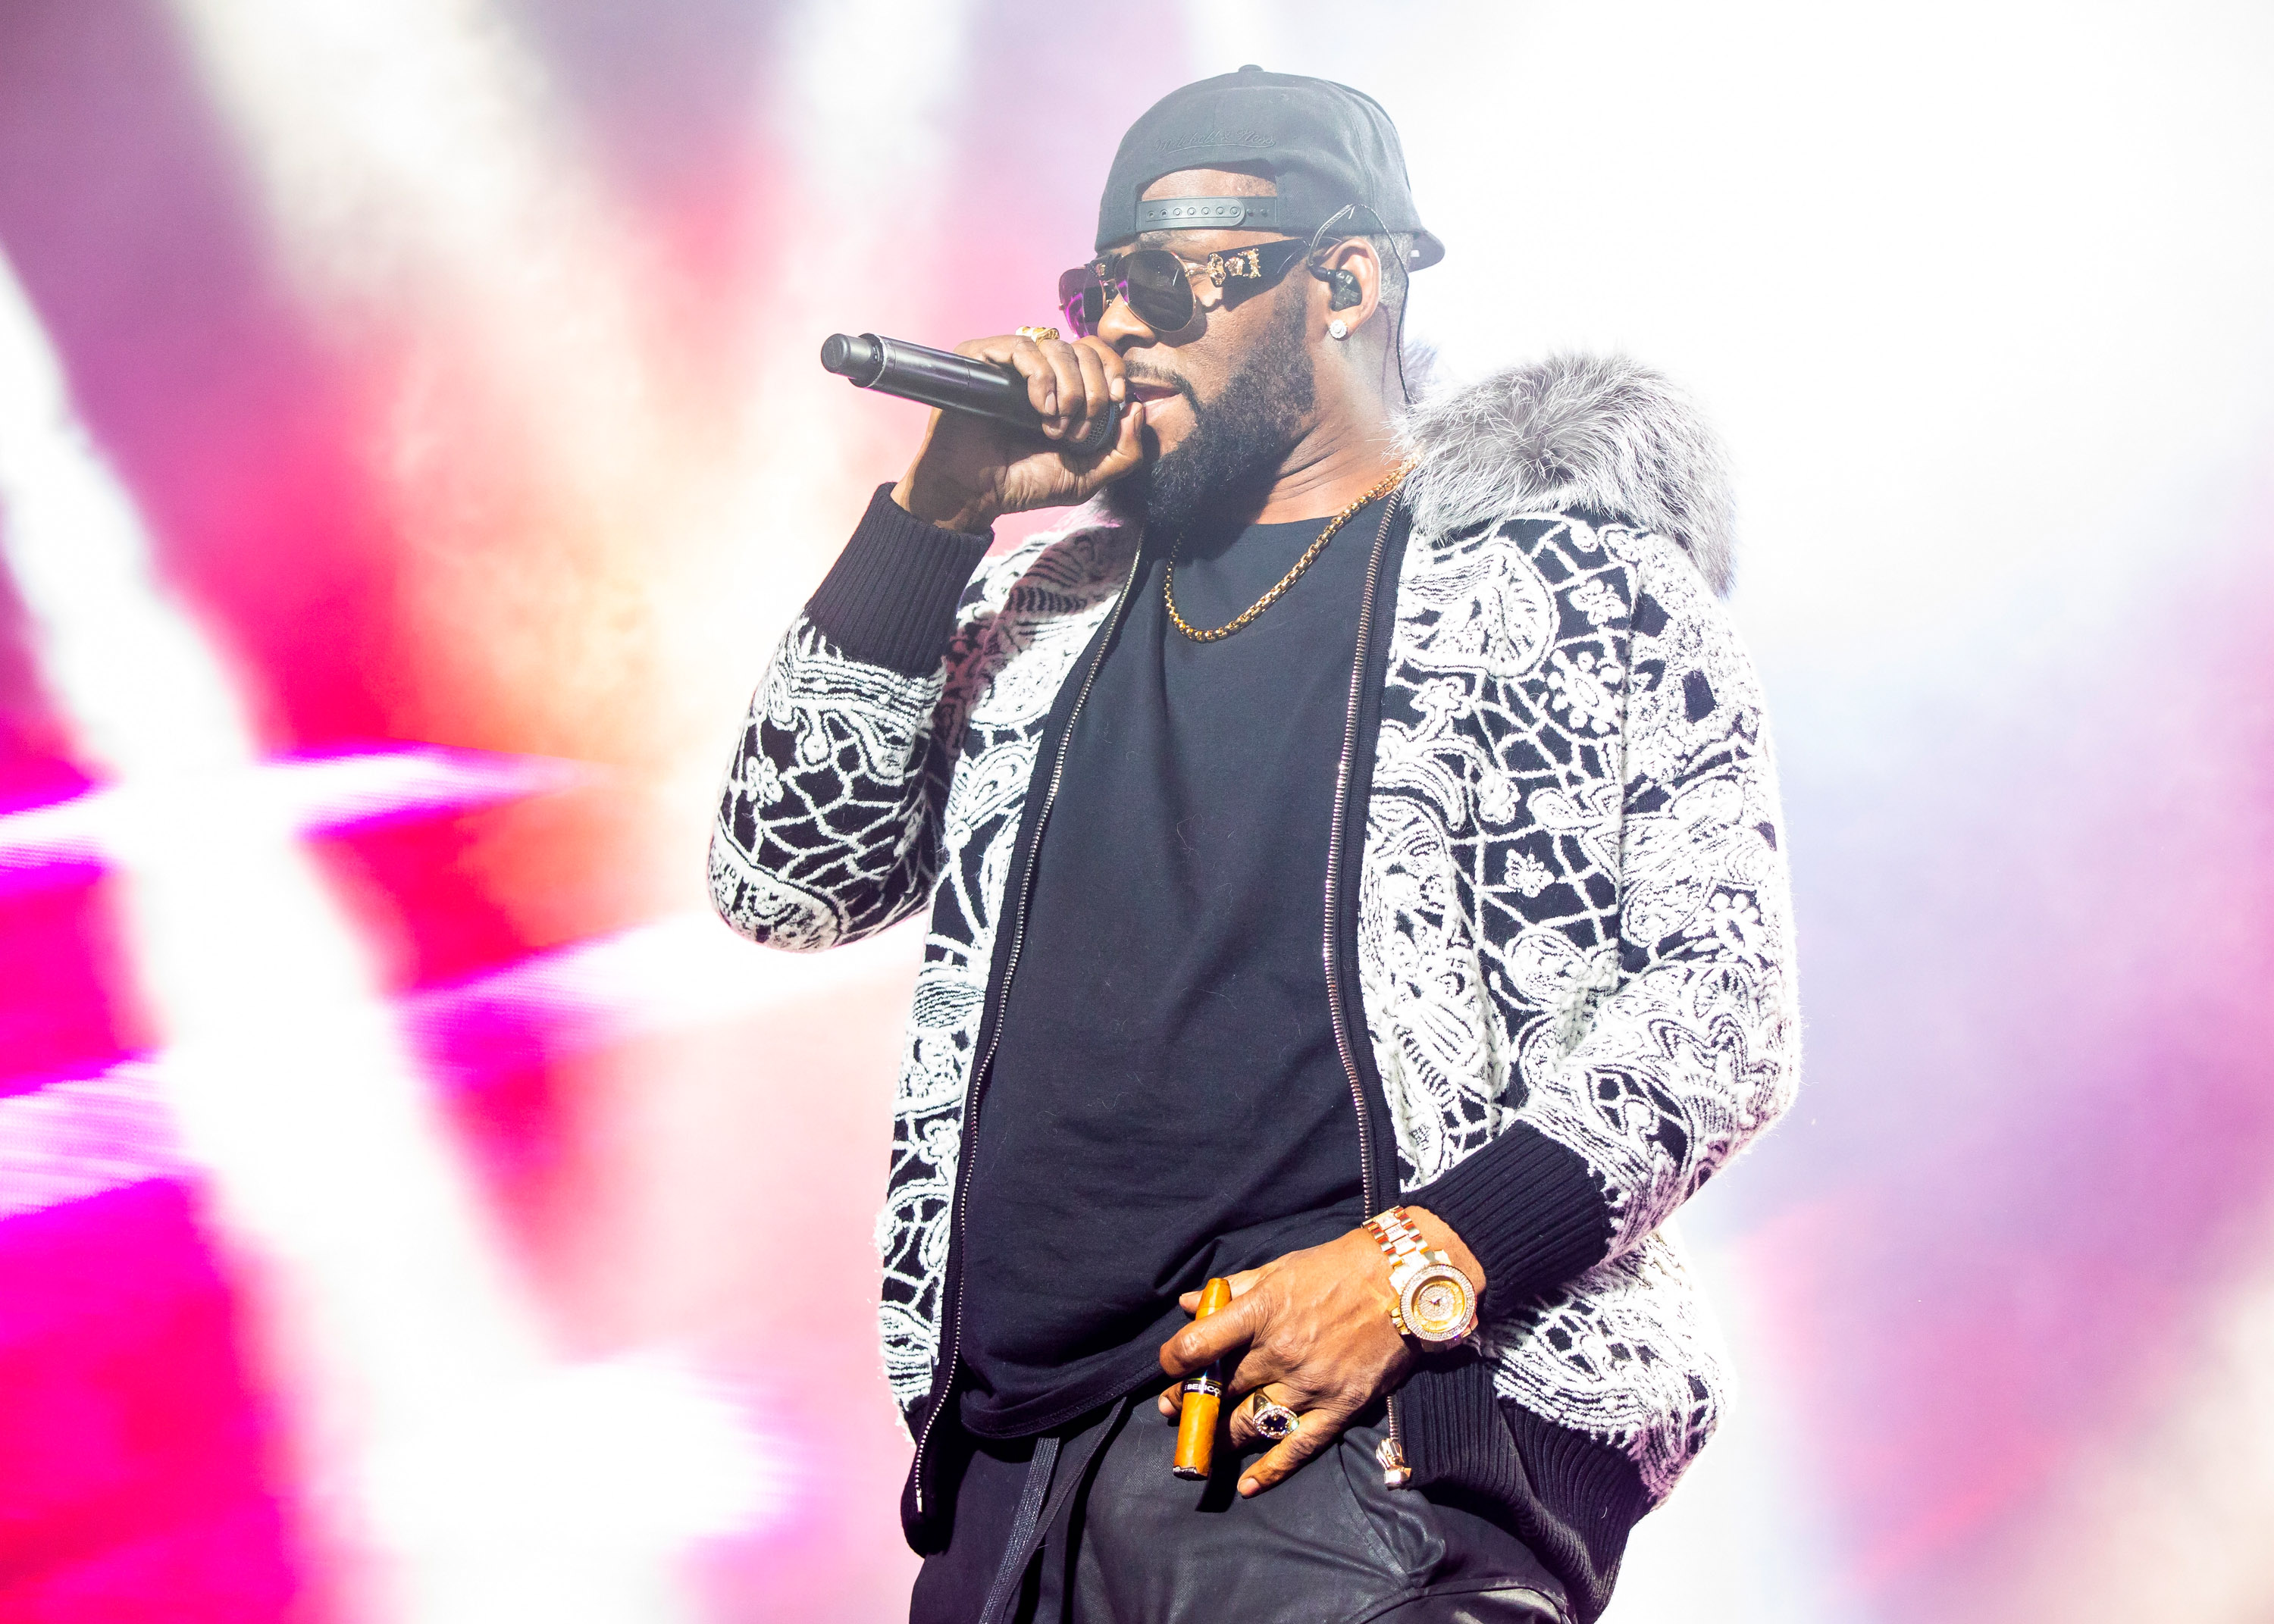 R. Kelly performs at Little Caesars Arena on February 21, 2018 in Detroit, Michigan at Little Caesars Arena on February 21, 2018 in Detroit, Michigan. (Scott Legato—Getty Images)